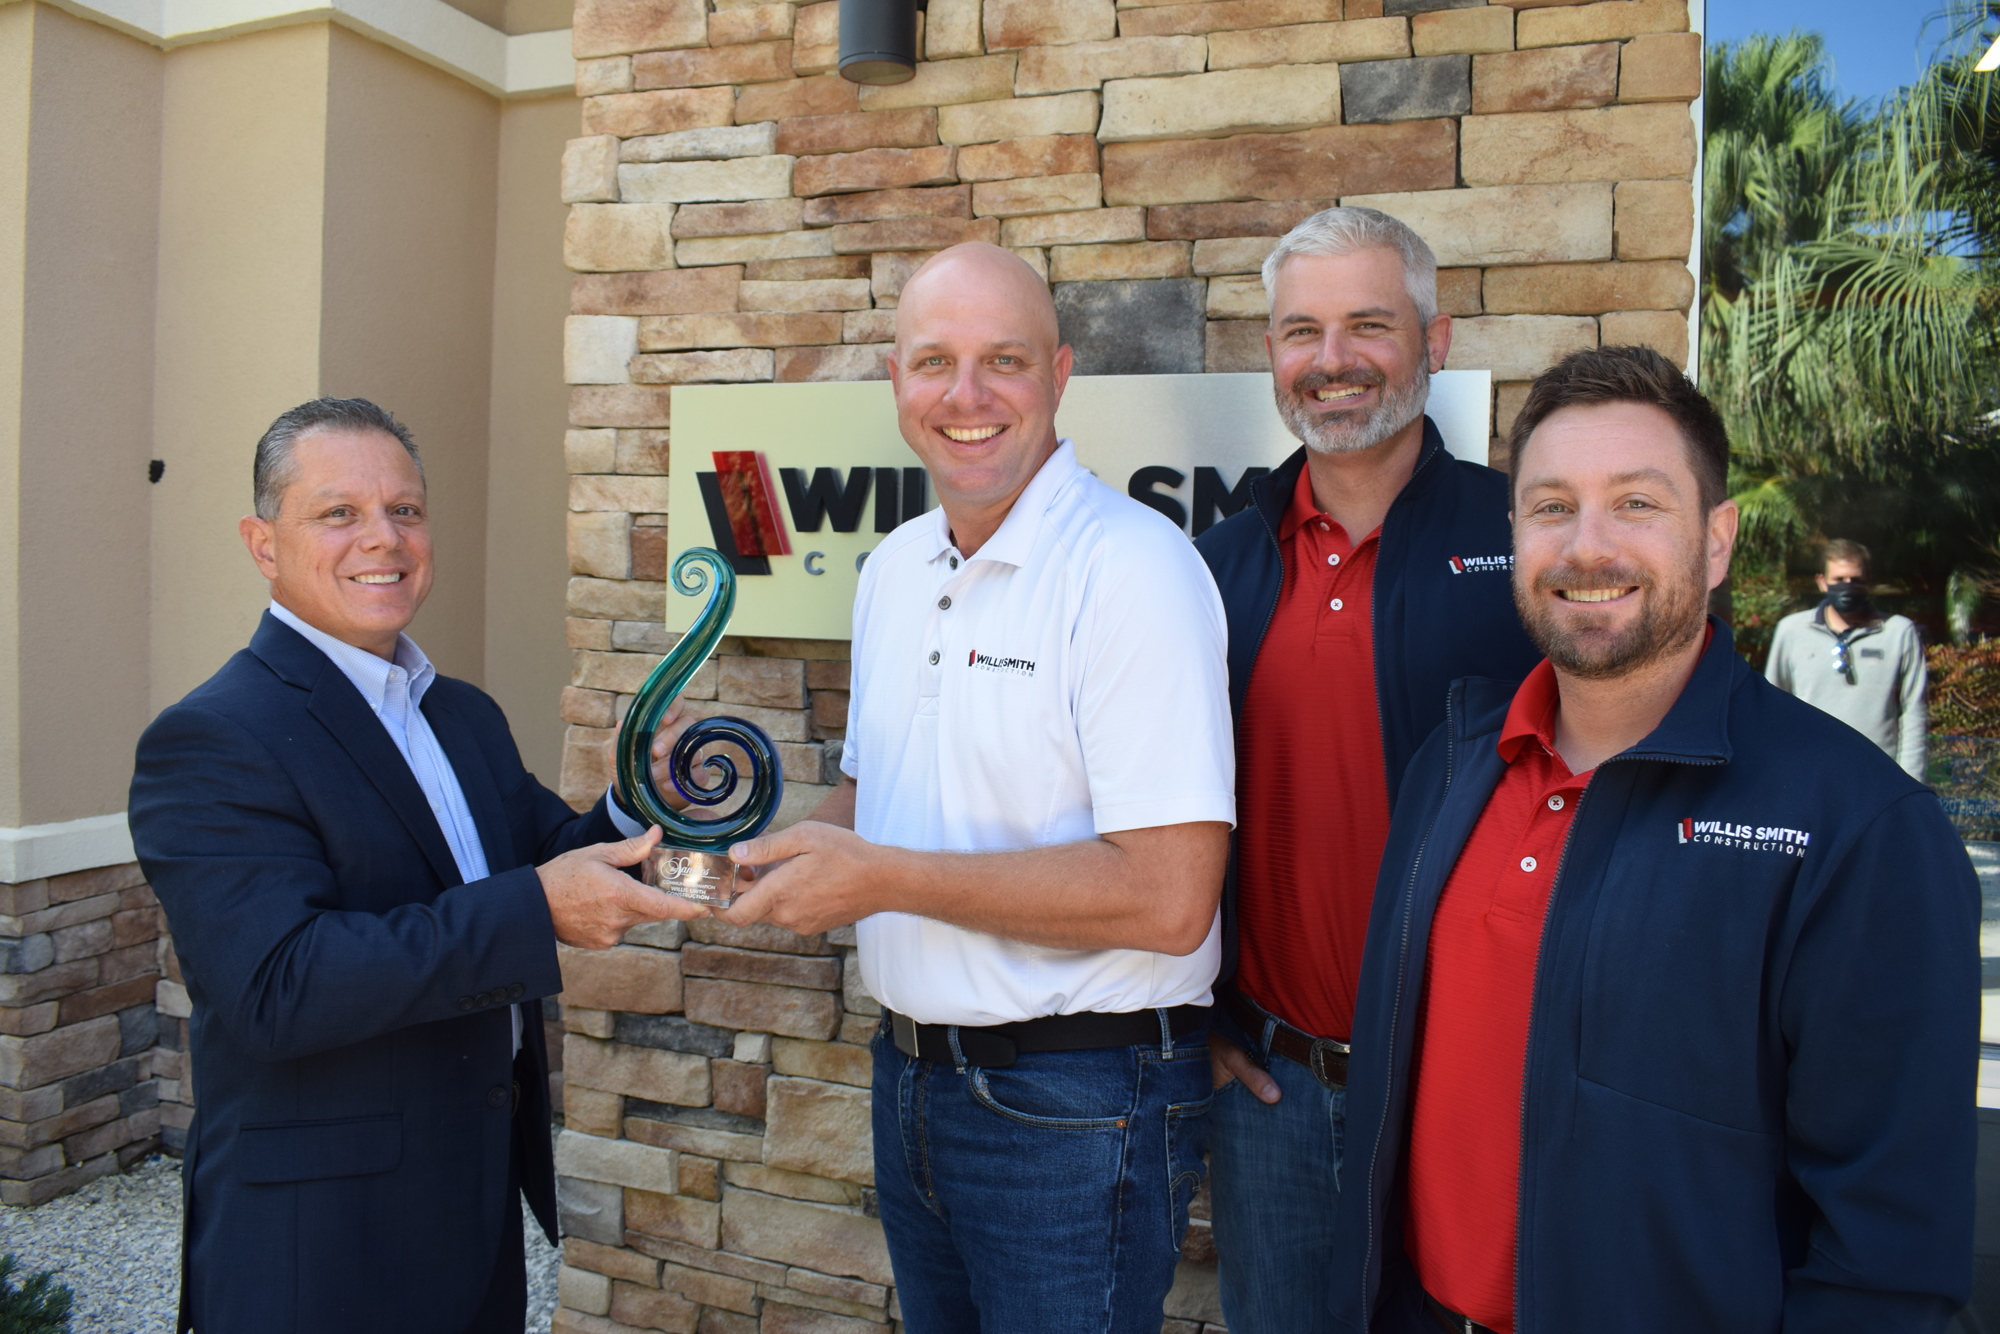 Dom DiMaio, the president and CEO of the Lakewood Ranch Business Alliance, presents the Community Champion-Company award to Willis Smith executives David Otterness, Brett Raymaker and Taylor Aultman.